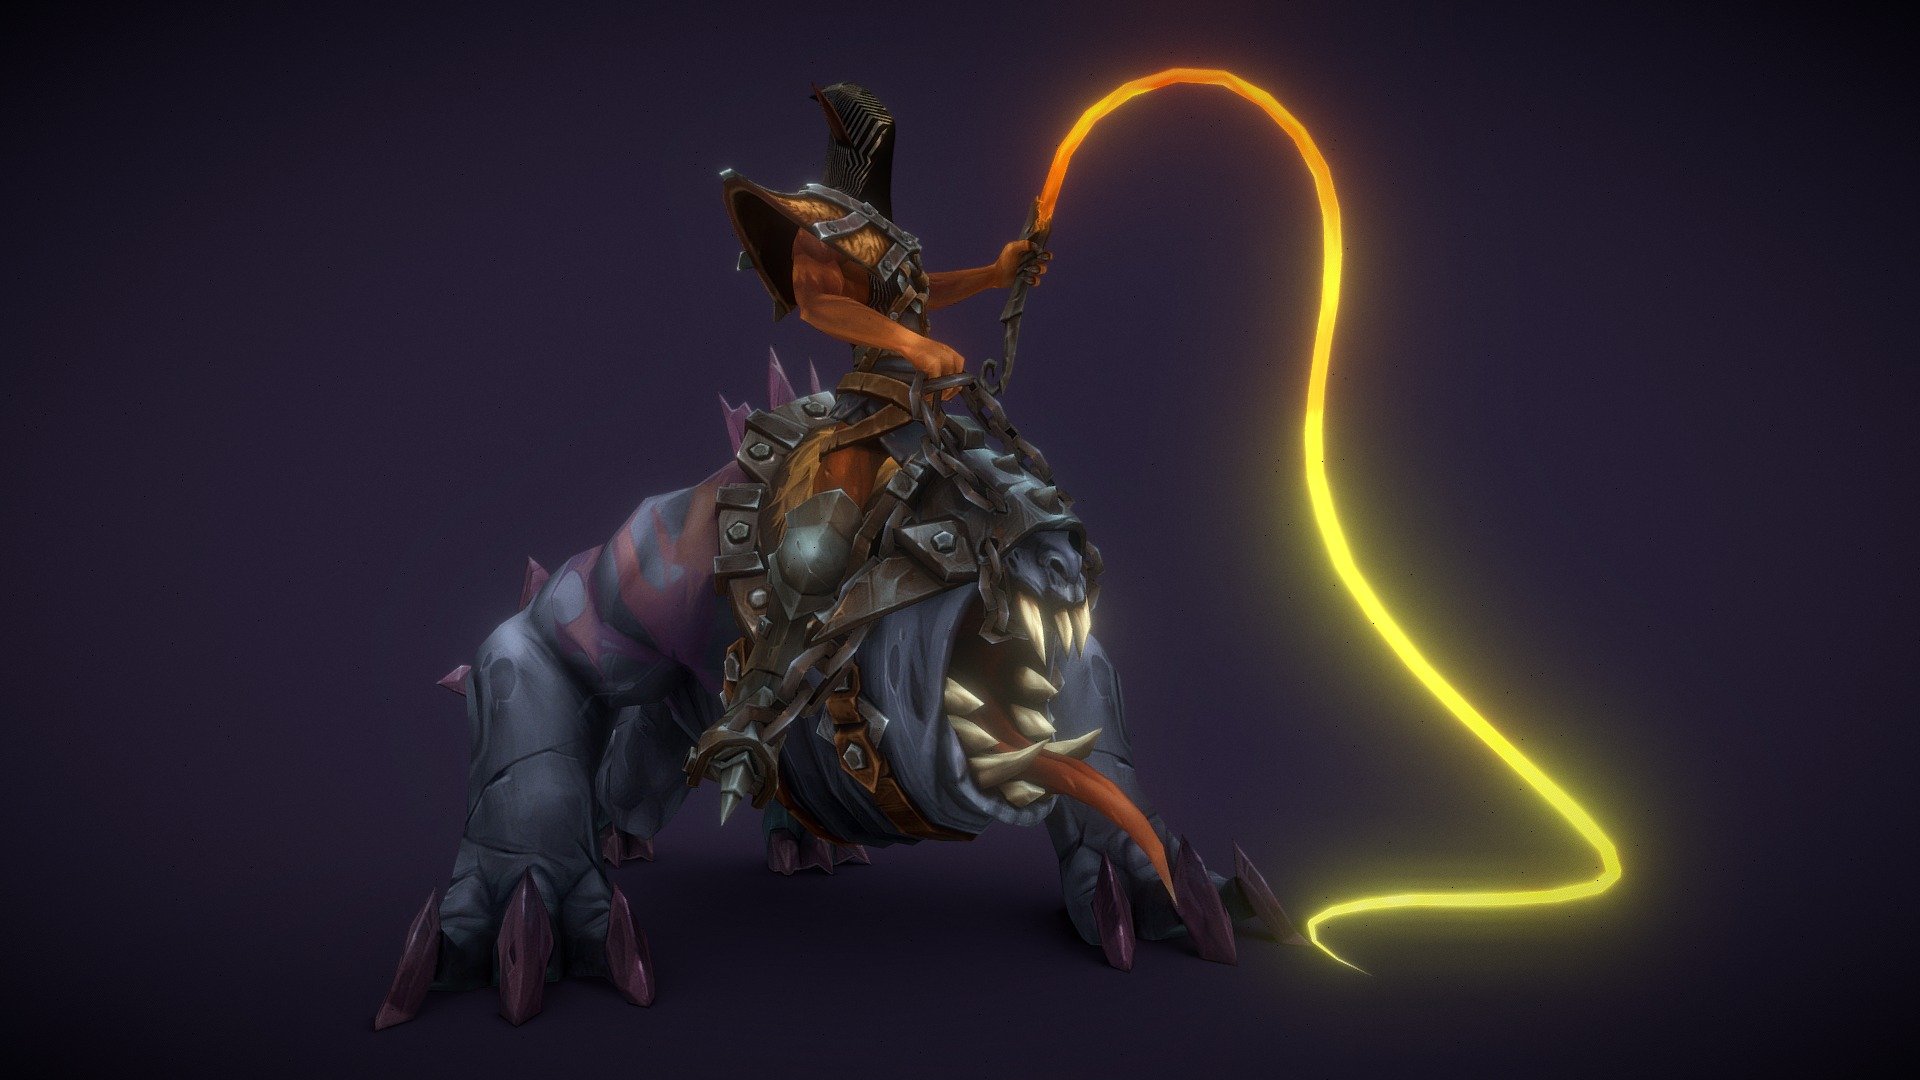 Soul Seeker

Very very angry.... Rides a beast. The beast does not see, but it sniffs very well.

Mobile game asset.
Texture: 2x 1024x1024
Diffuse - Soul Seeker - 3D model by Andrey (@fruitmamba) 3d model